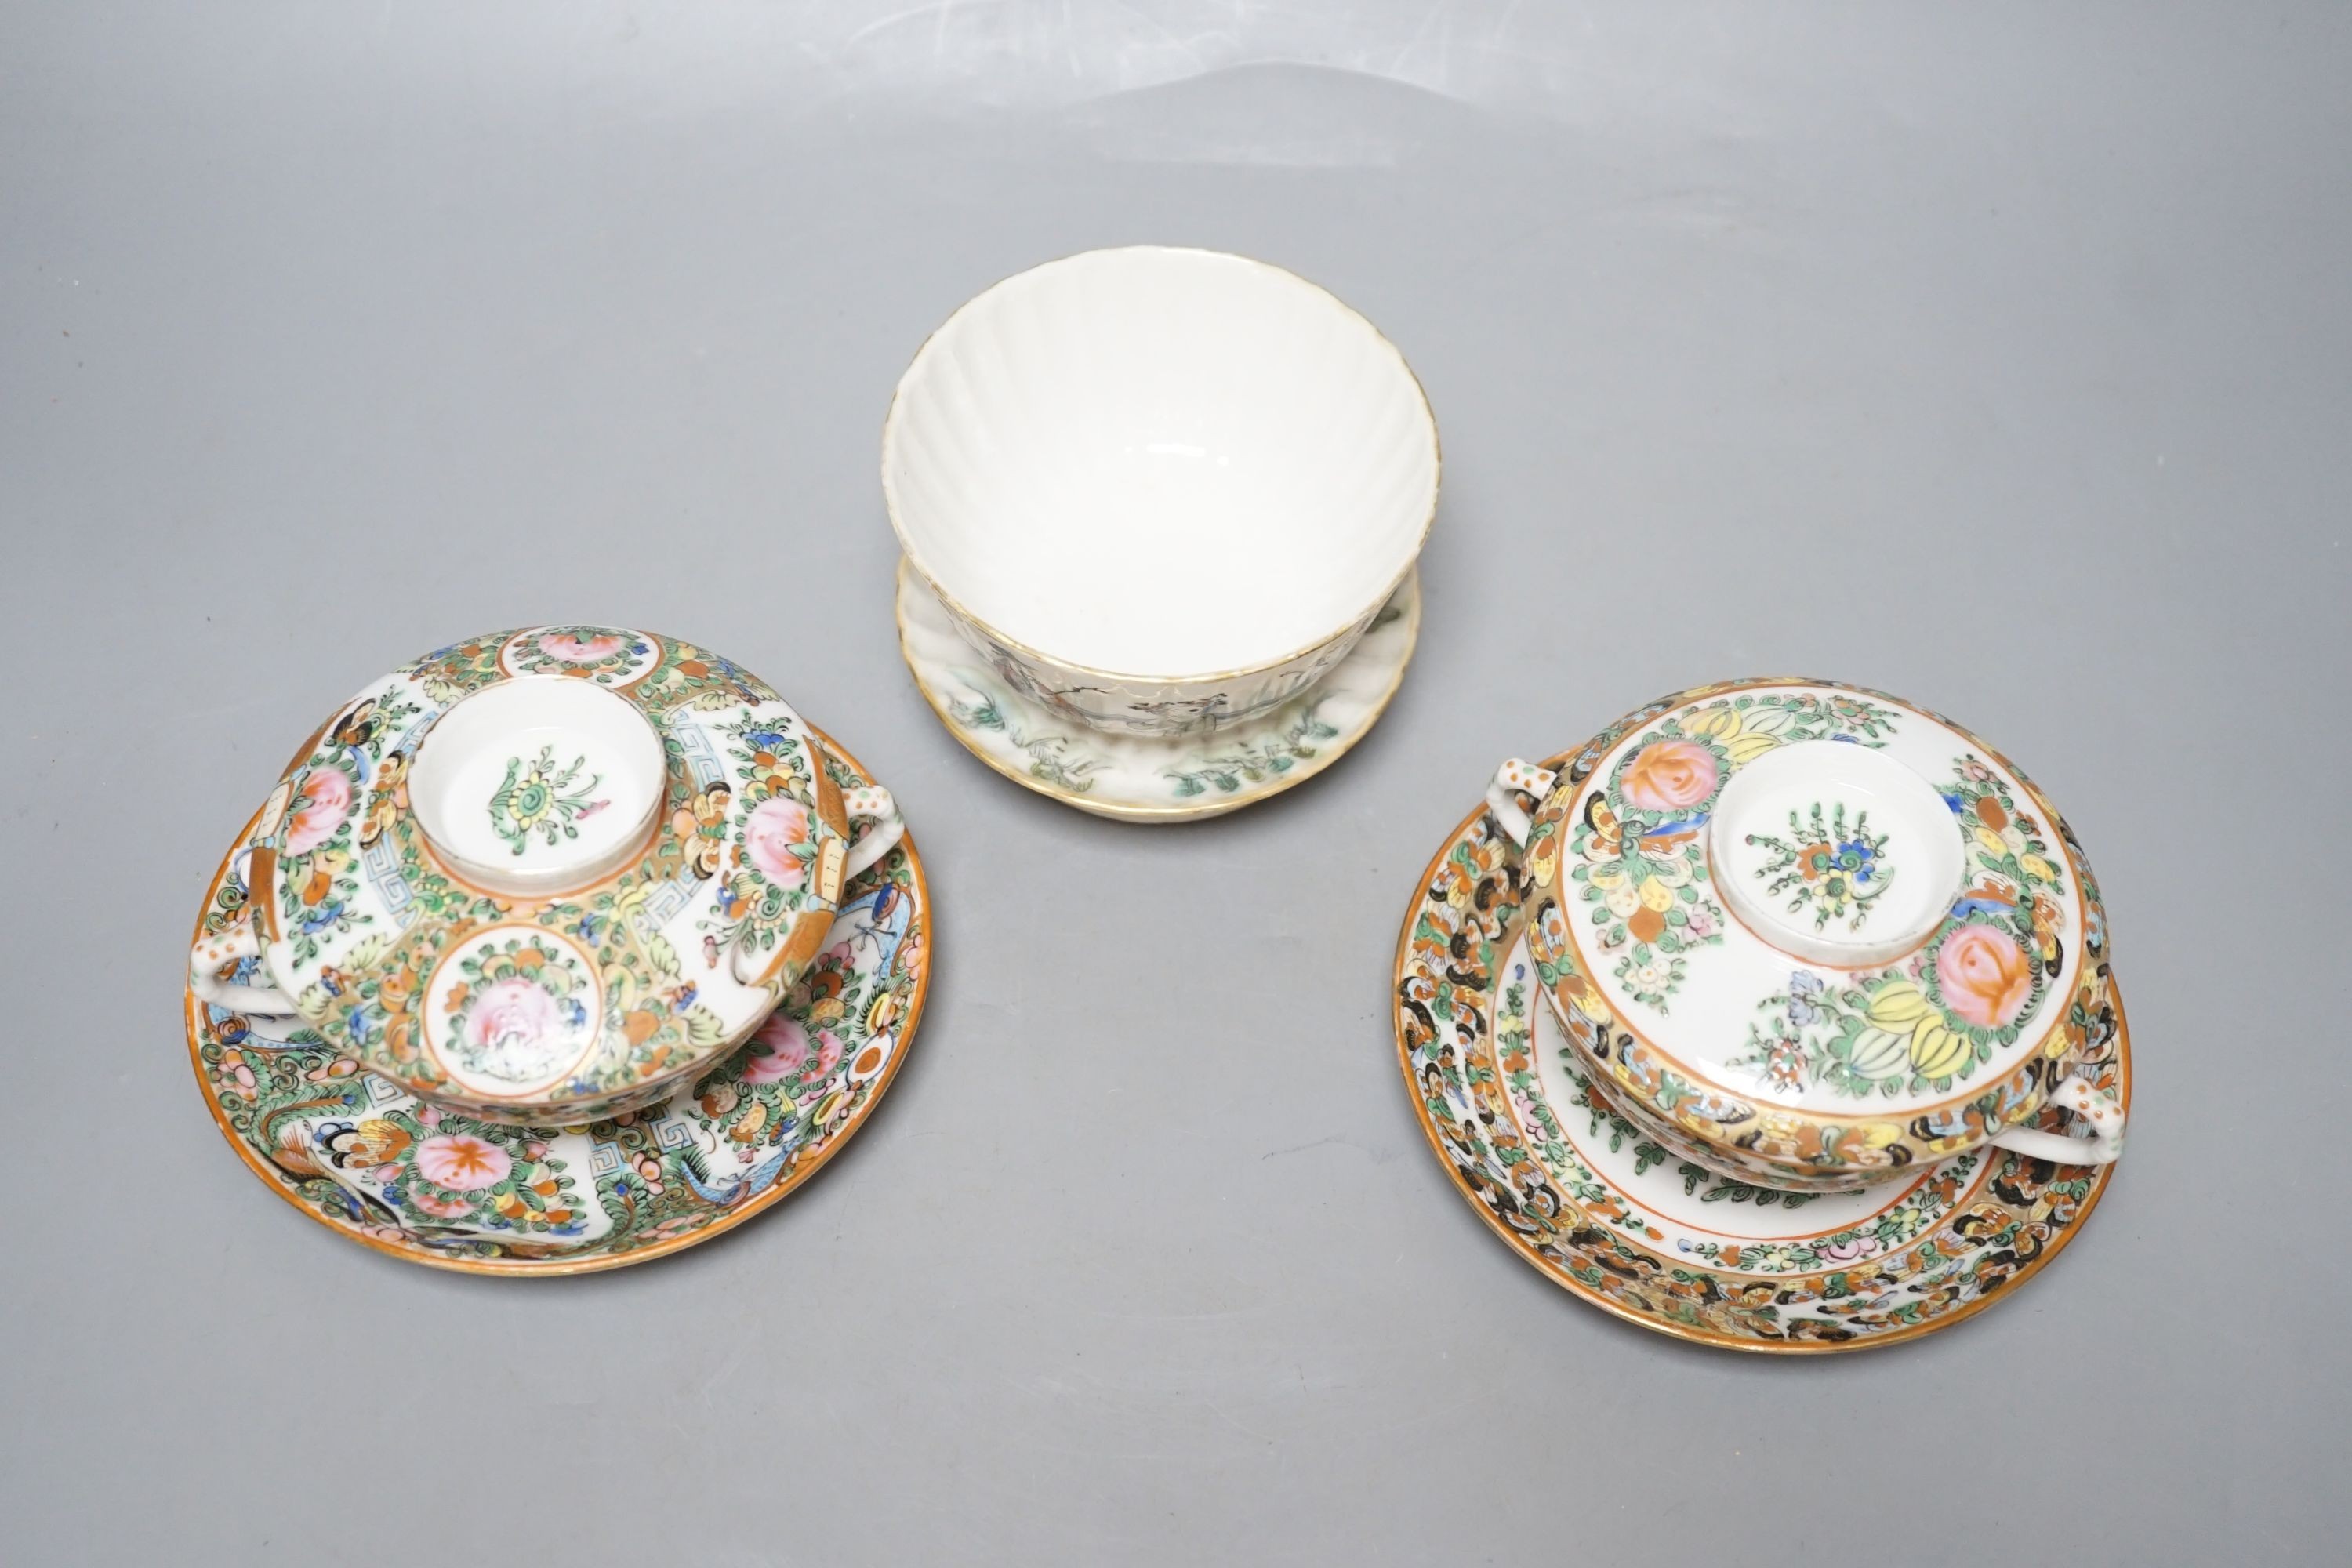 A Chinese porcelain tea bowl and stand and a pair of Cantonese bowls, covers and stands